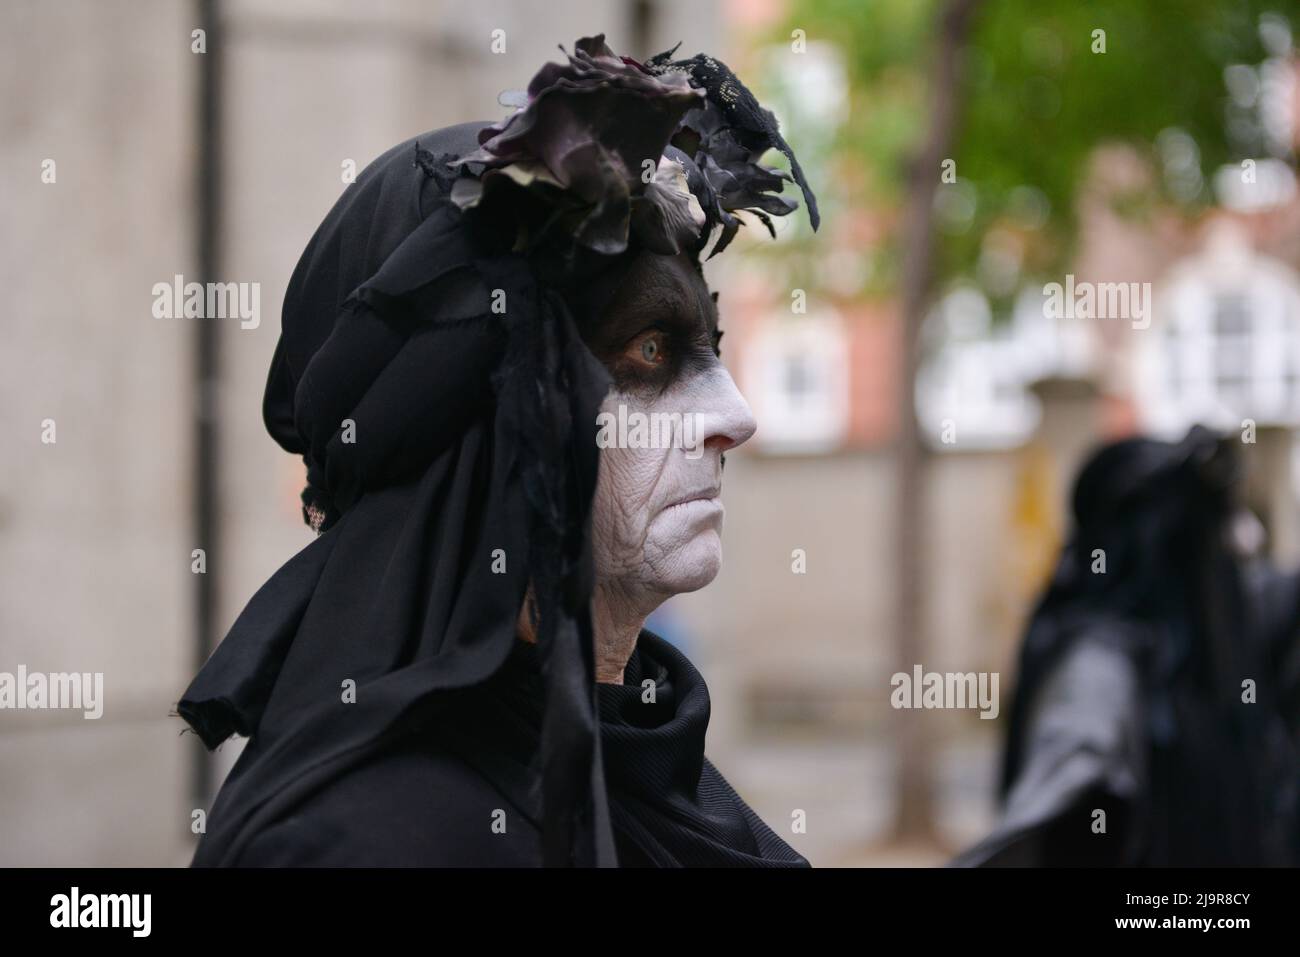 Member of The Black Rebels from Extinction Rebellion seen at the rally. Extinction Rebellion protesters gathered at Methodist Central Hall Westminster in London, to stop Shell Annual General Meeting. Stock Photo